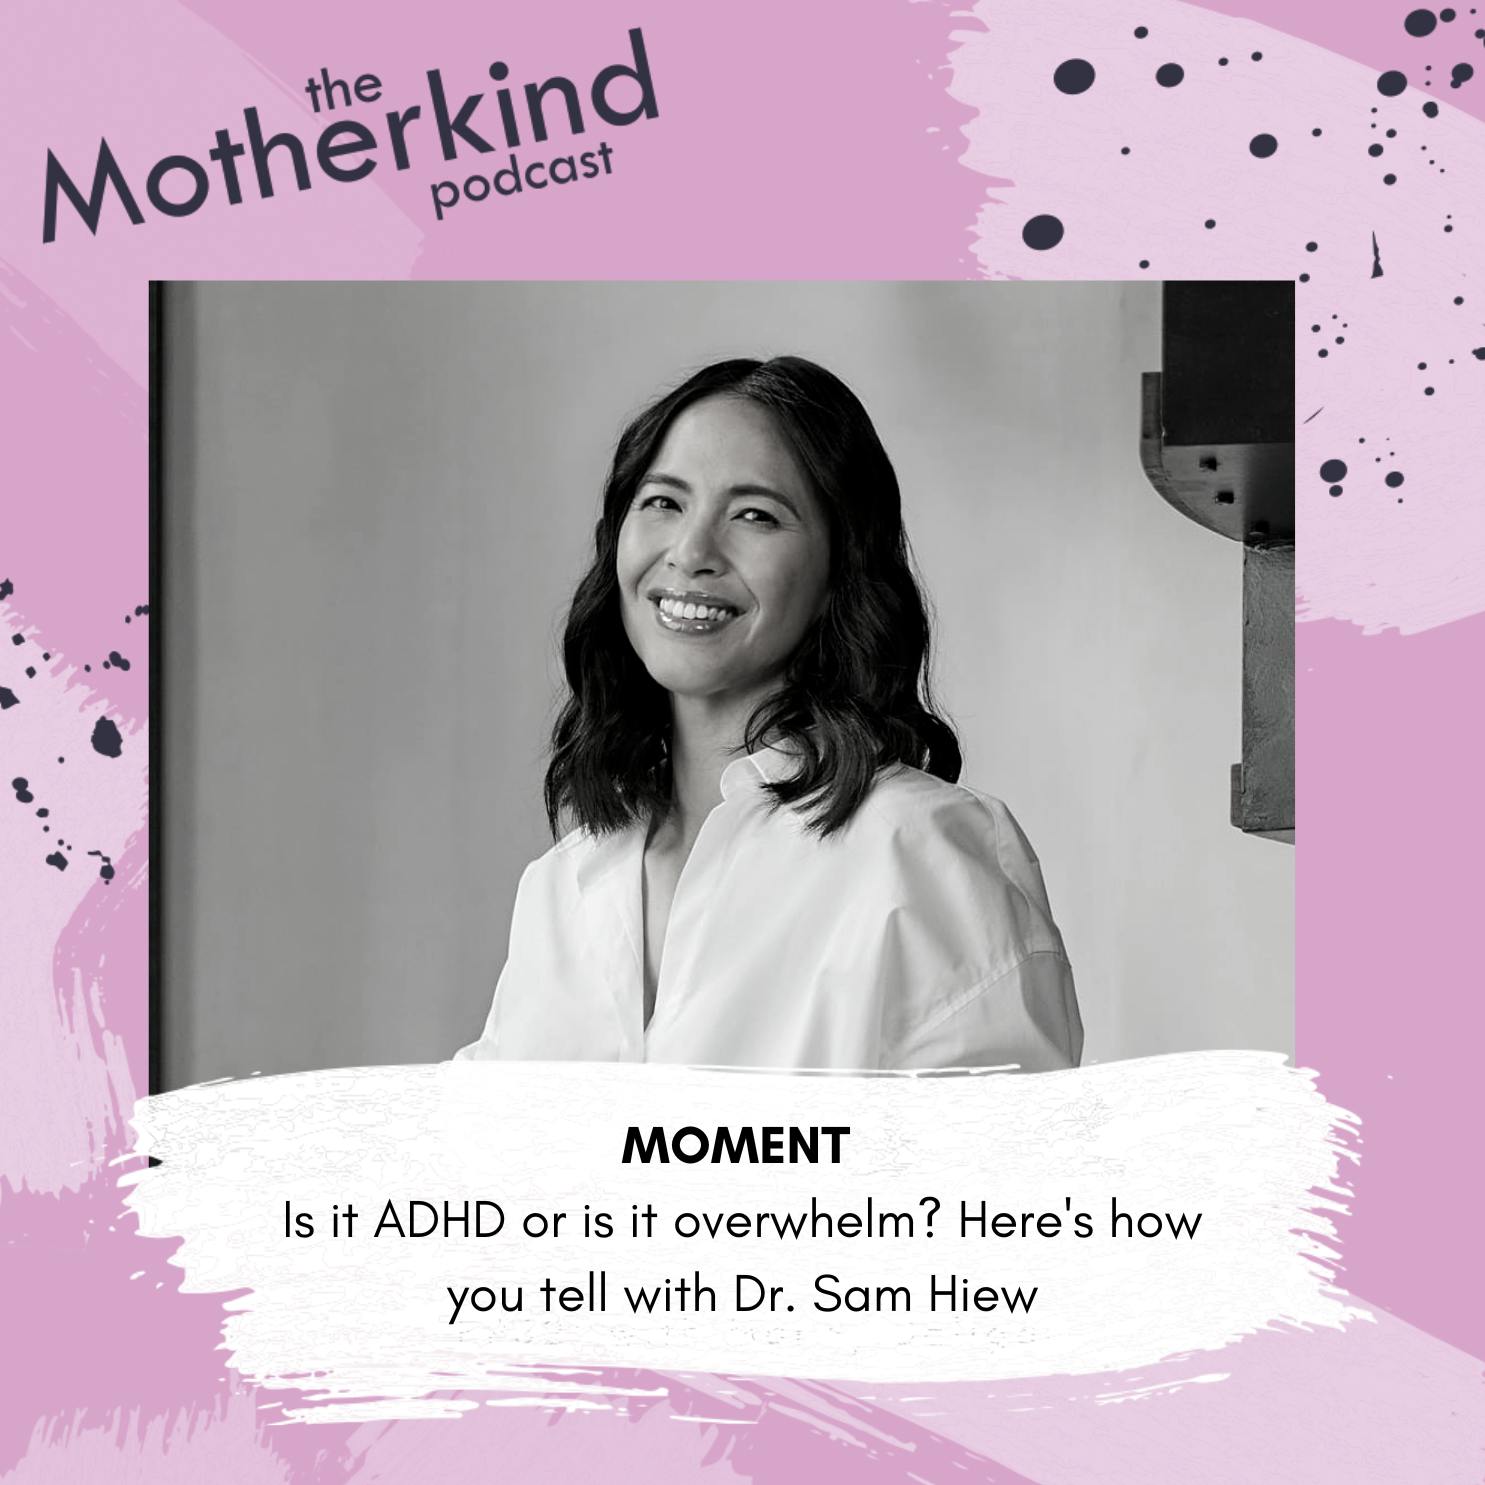 MOMENT | Is it ADHD or is it overwhelm? Here’s how you tell with Dr. Sam Hiew